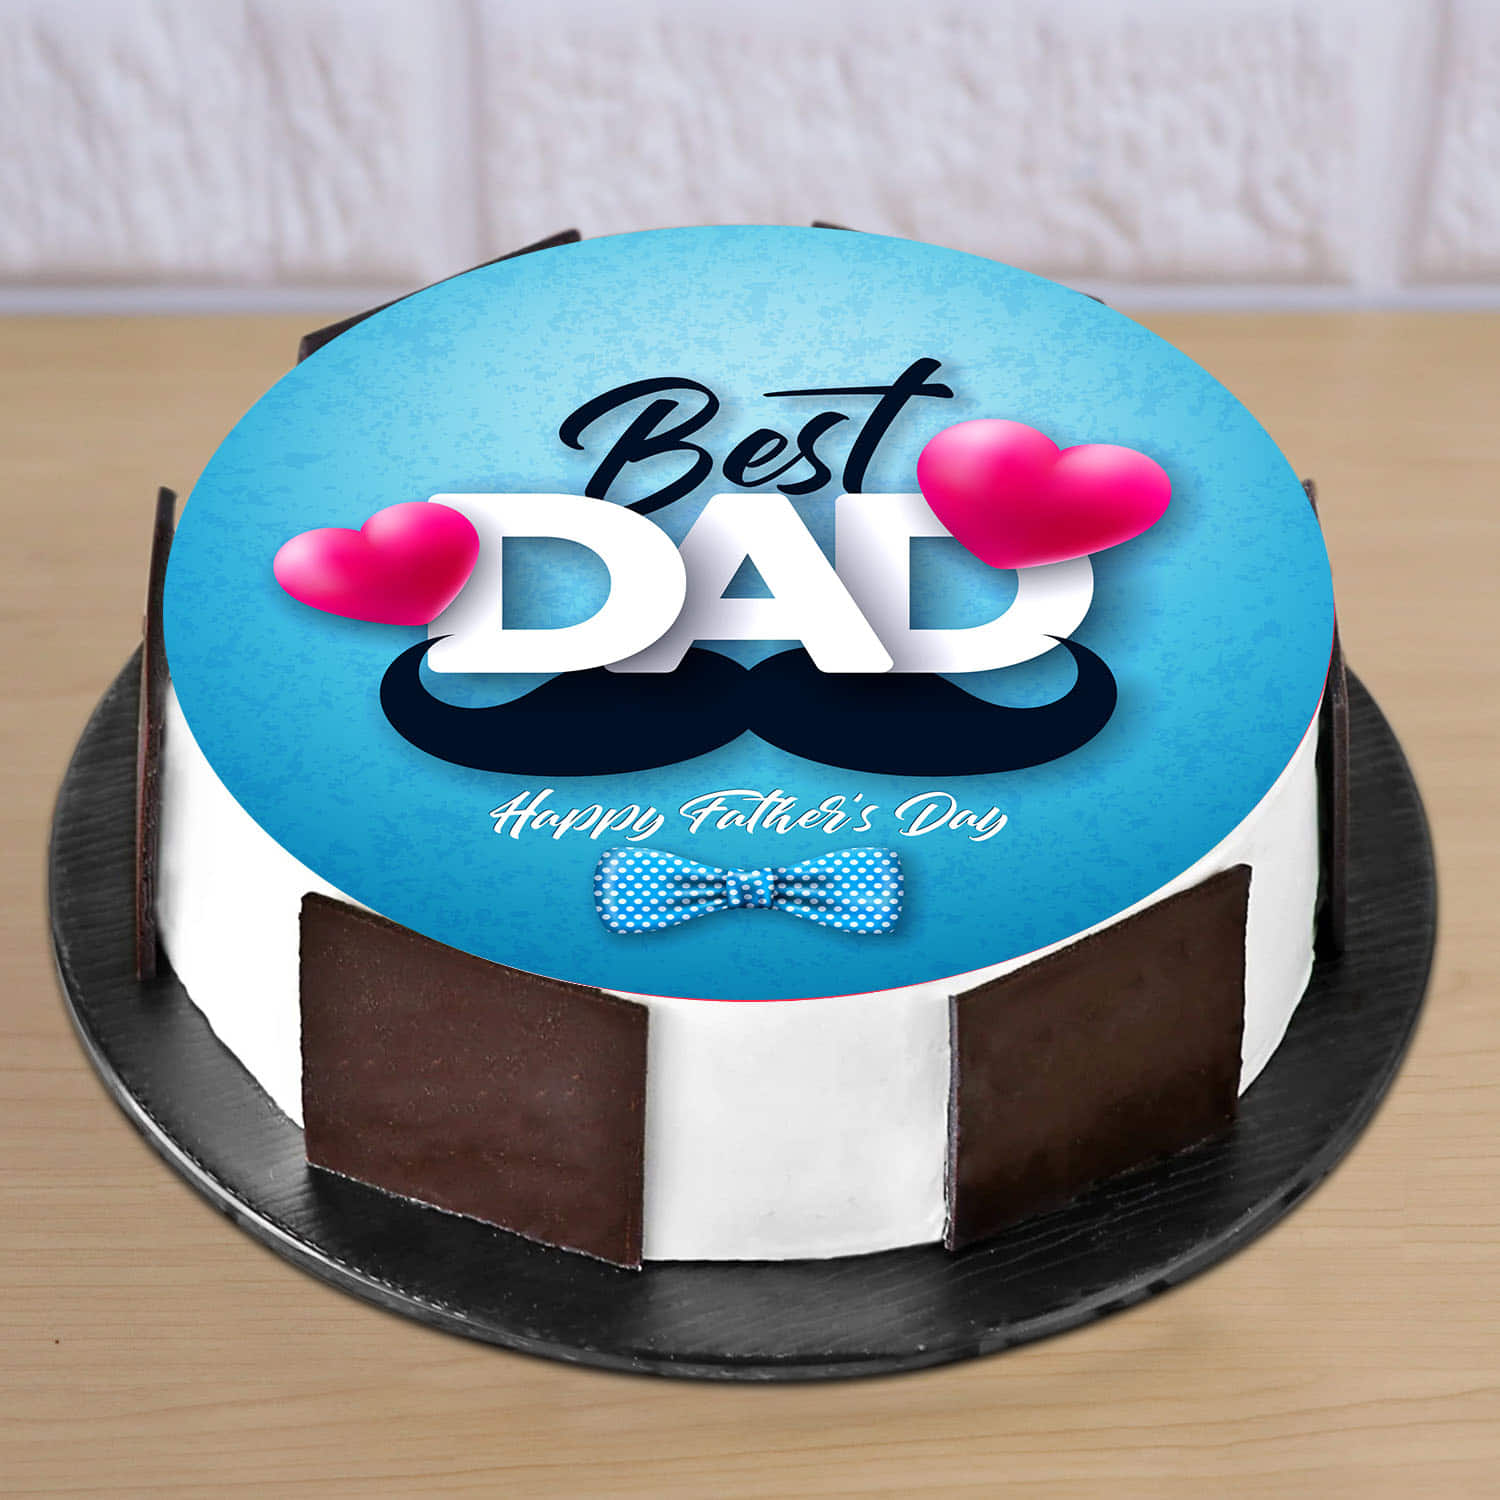 Best Dad Ever Cake Topper - DADCT018 – Cake Toppers India